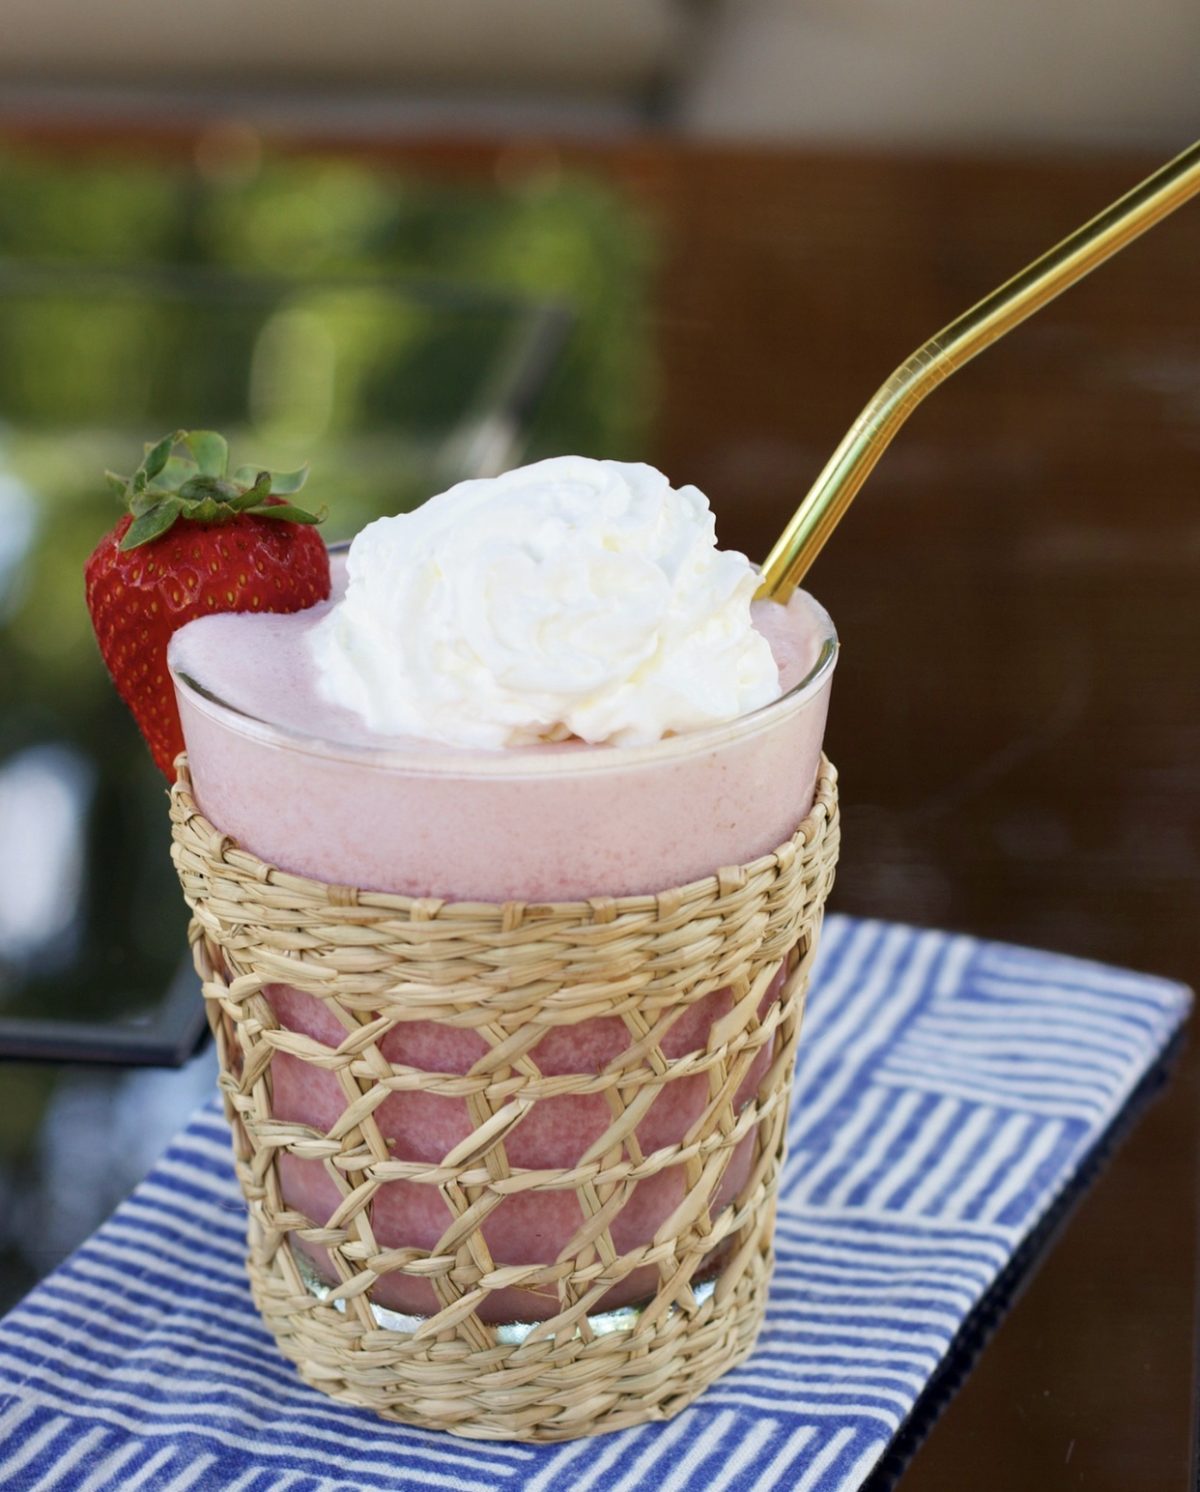 A strawberry banana smoothie in a glass with a rattan sleeve.  It has a gold straw and is topped with whipped cream and garnished with a strawberry.